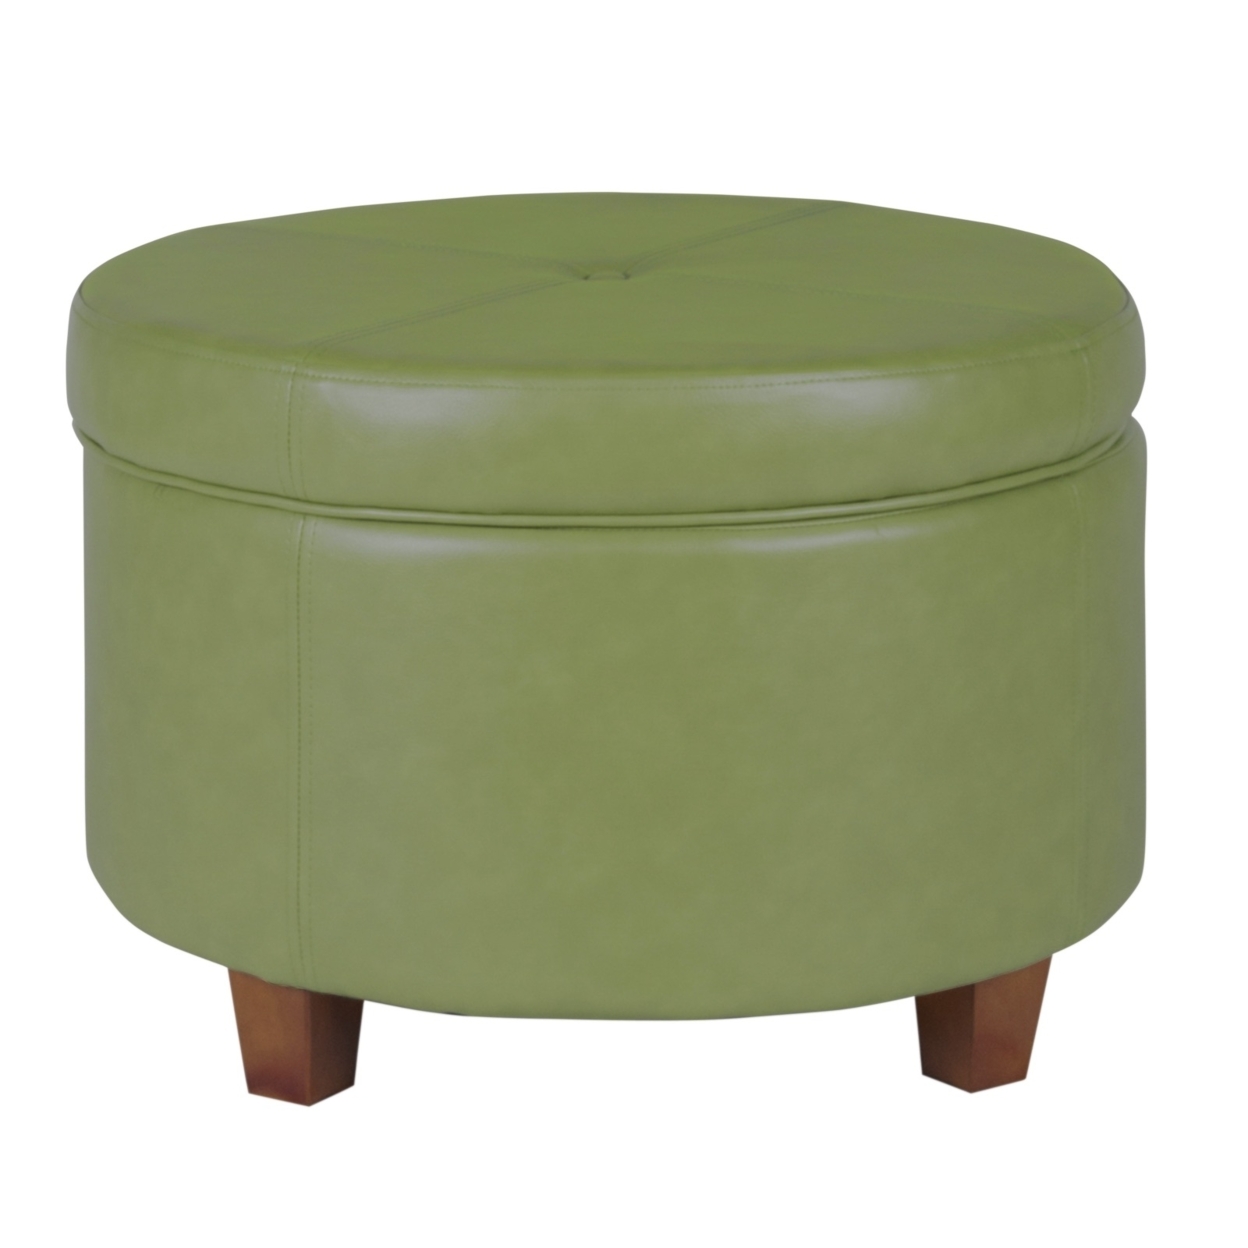 Leatherette Upholstered Wooden Ottoman With Single Button Tufted Lift Top Storage, Green, Large- Saltoro Sherpi